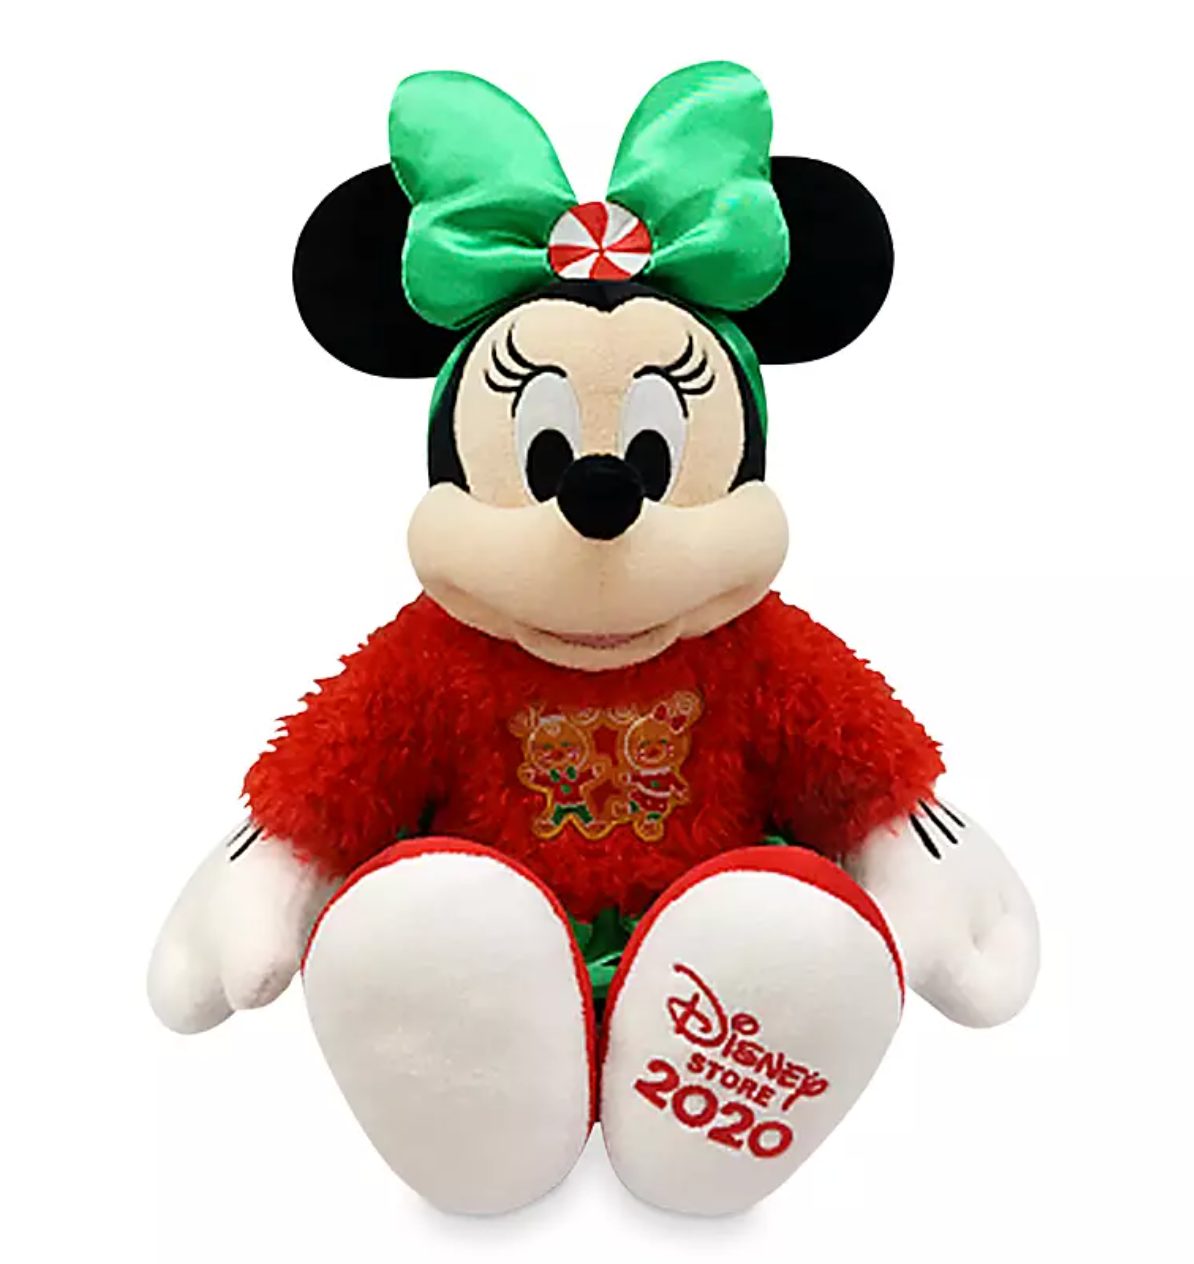 Disney Store 2020 Minnie Mouse Holiday Cheer Christmas Medium Plush New with Tag